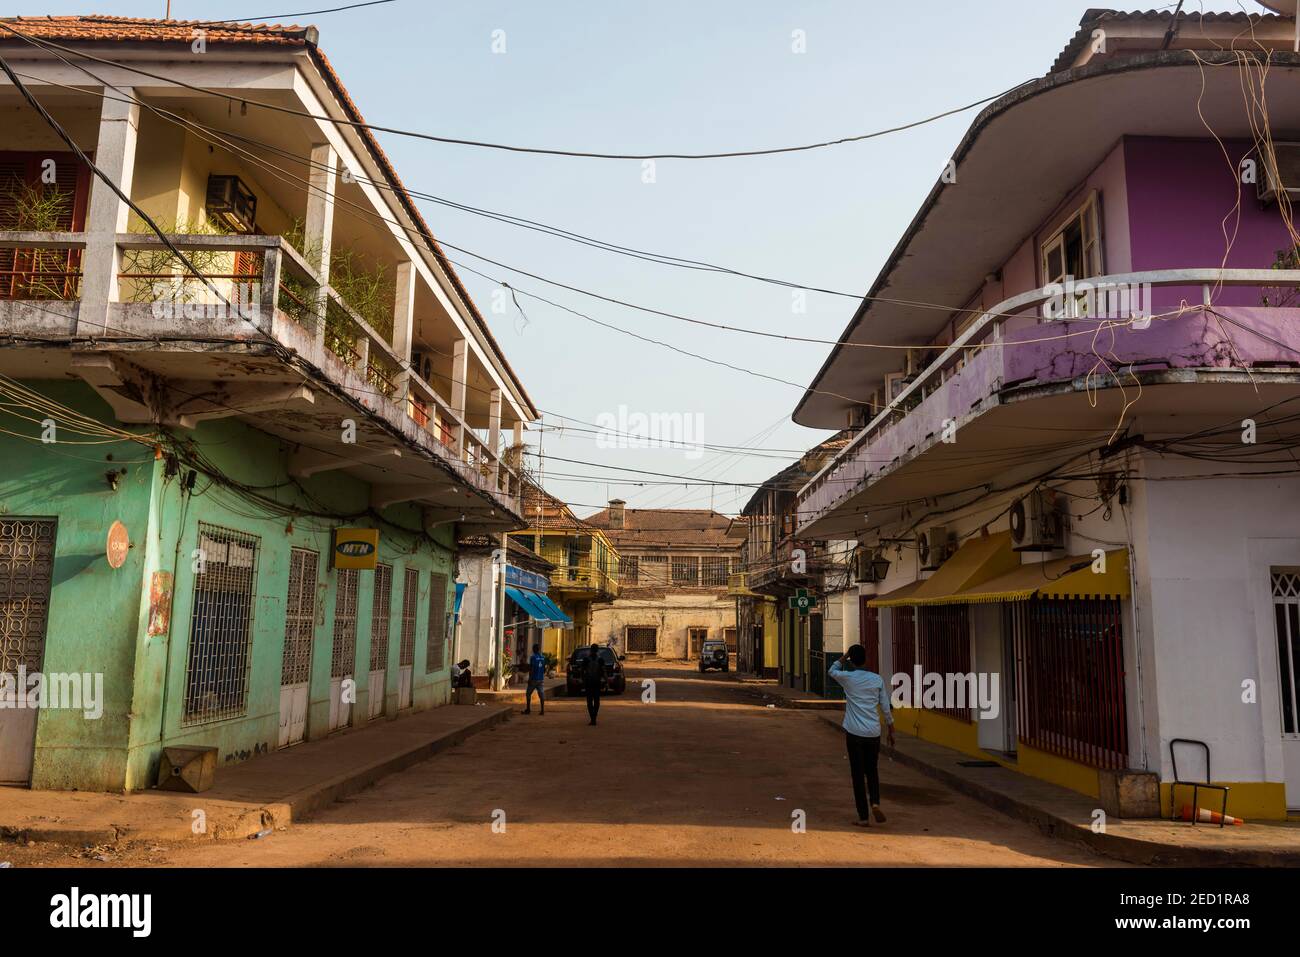 Old decaying Portuguese architecture, Bissau, Guinea Bissau Stock Photo